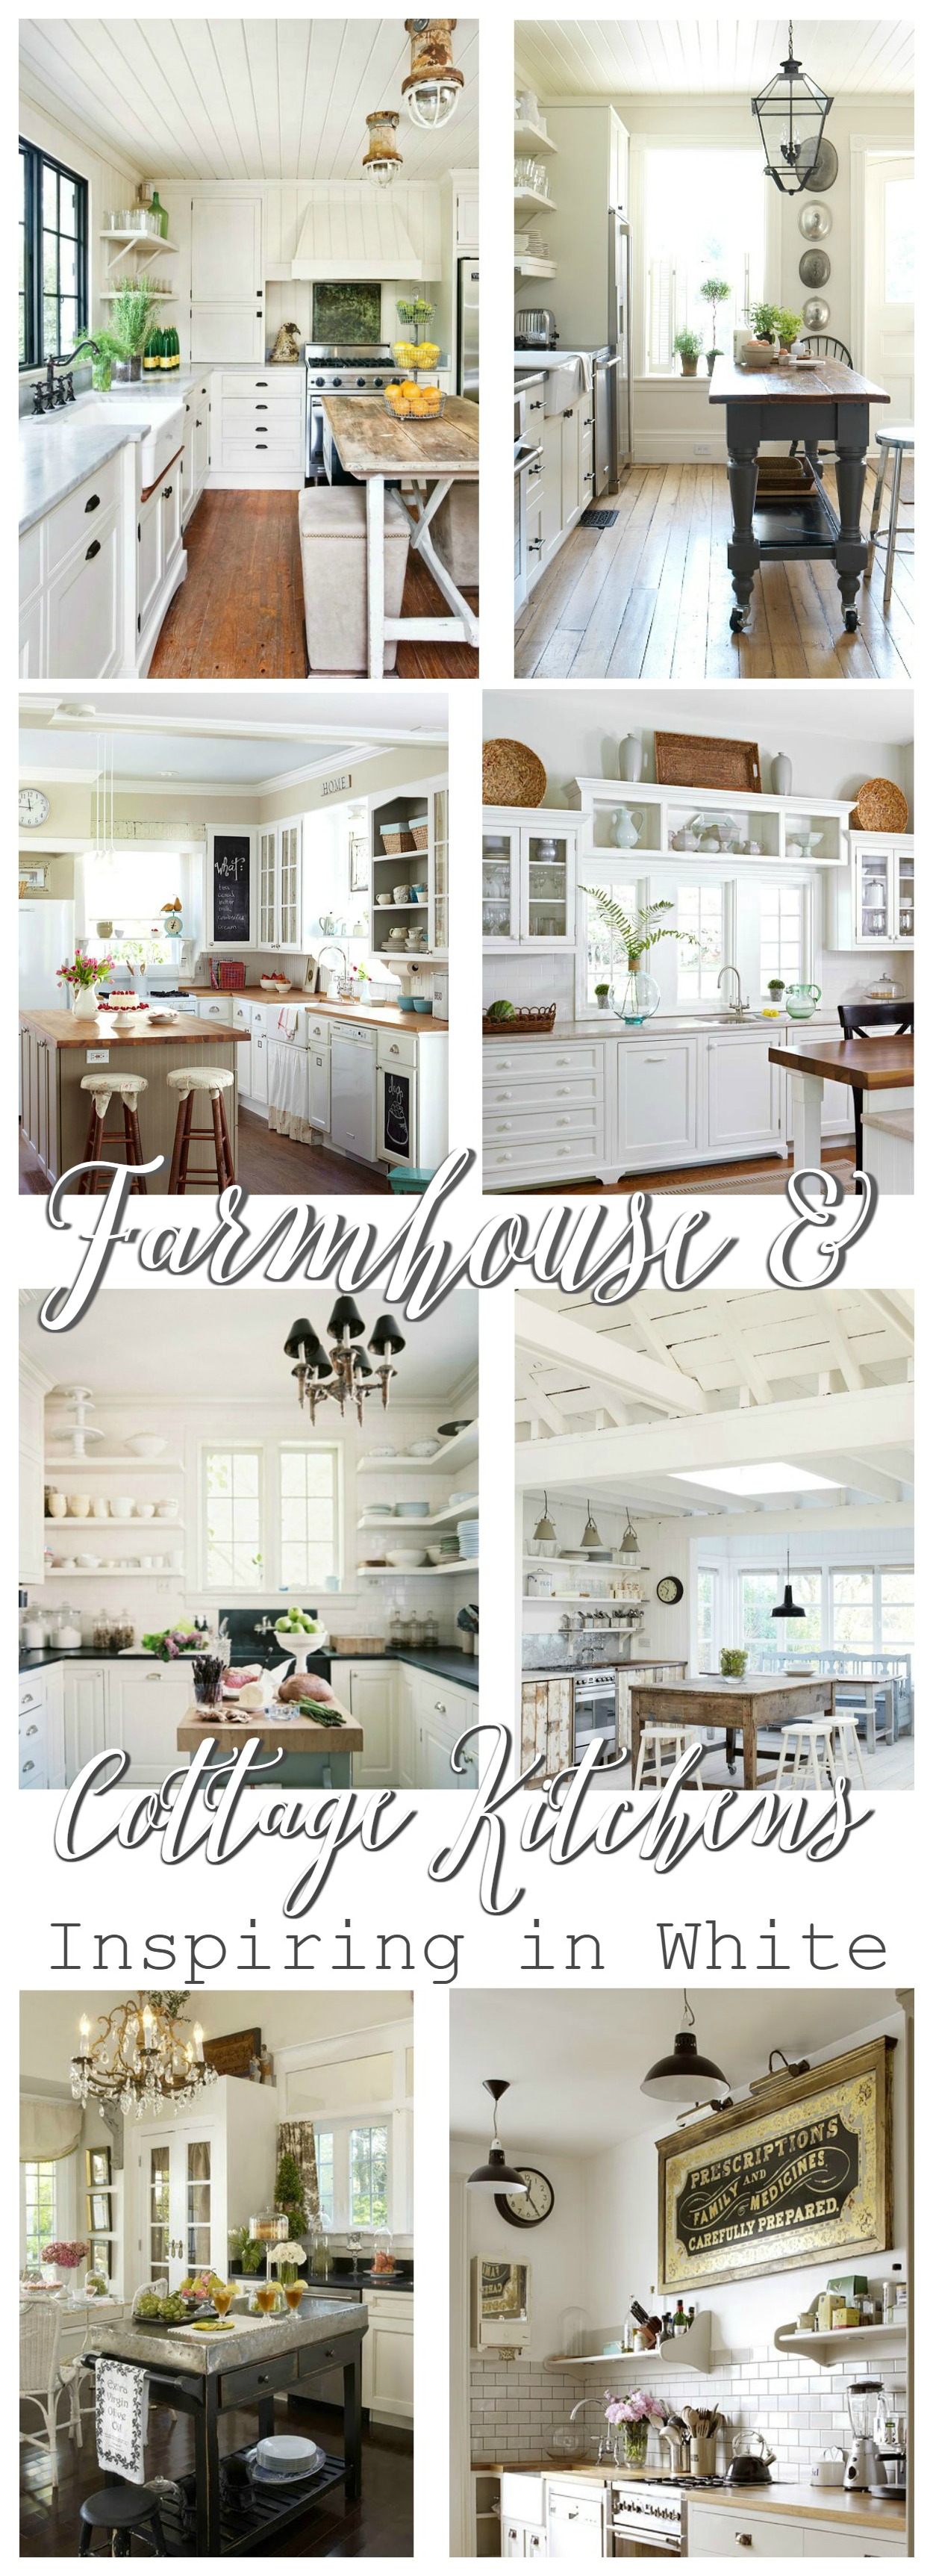 Farmhouse Cottage Kitchens at foxhollowcottage.com - Inspiring in White!